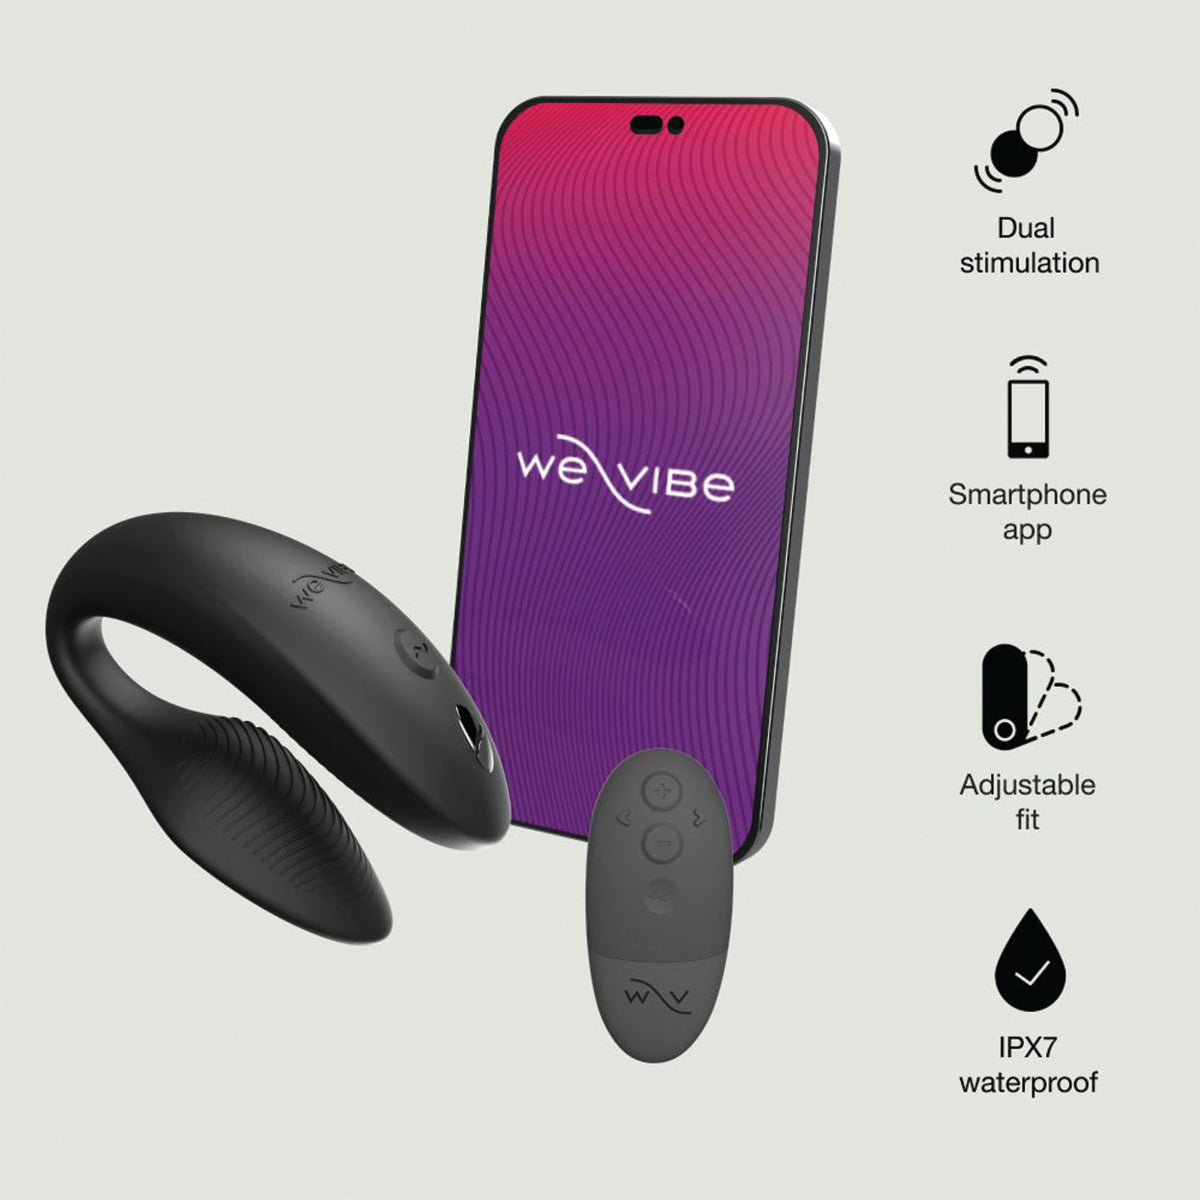 Arcwave X We-Vibe Limited Edition Double the Fun Kit